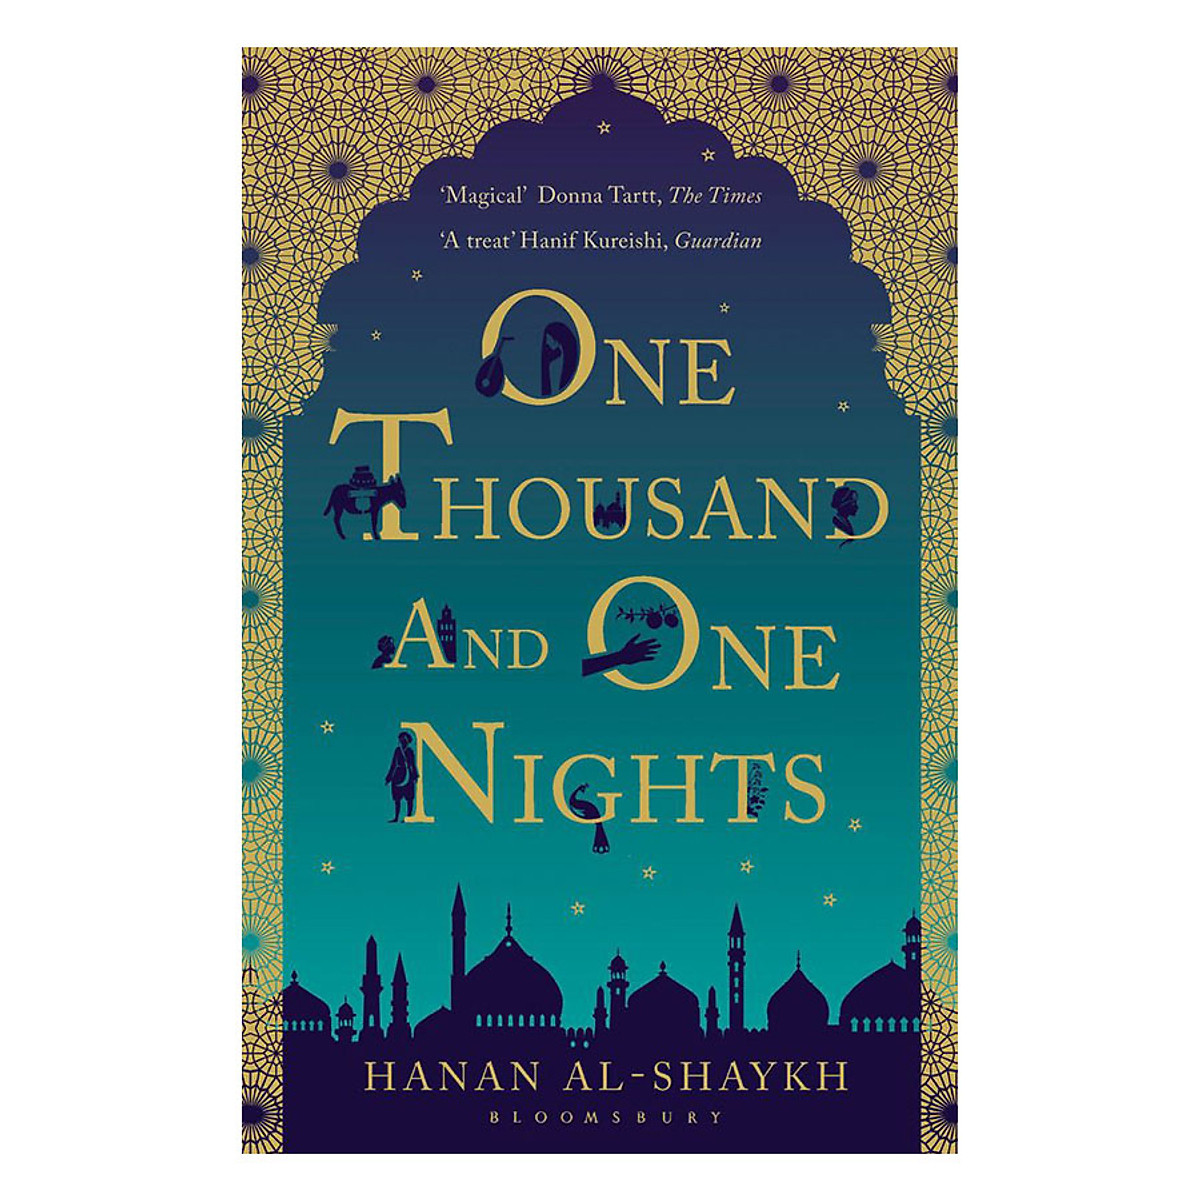 One Thousand And One Nights